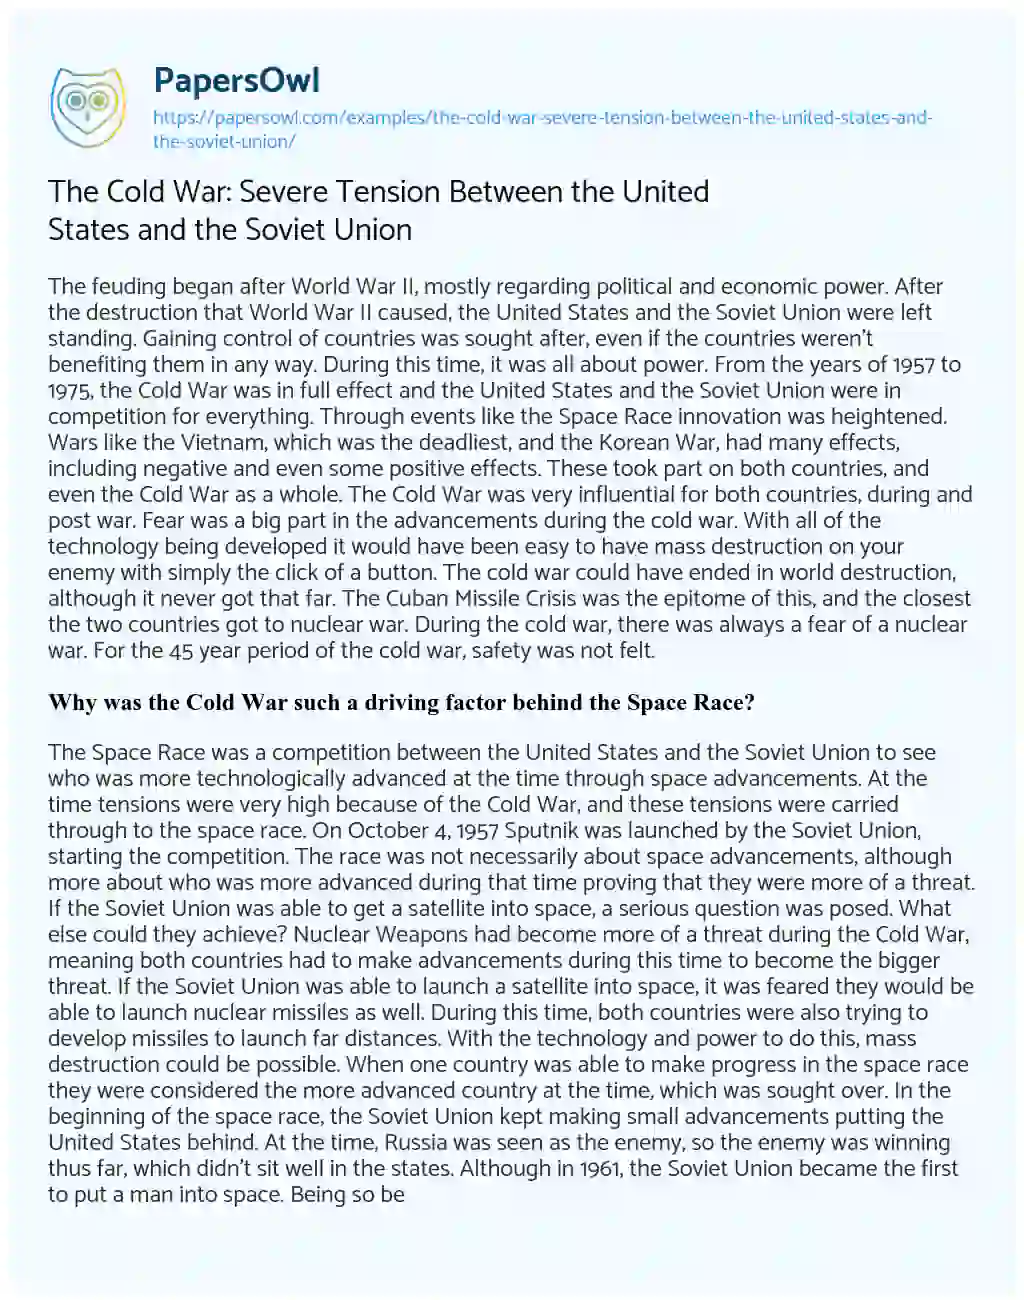 Essay on The Cold War: Severe Tension between the United States and the Soviet Union